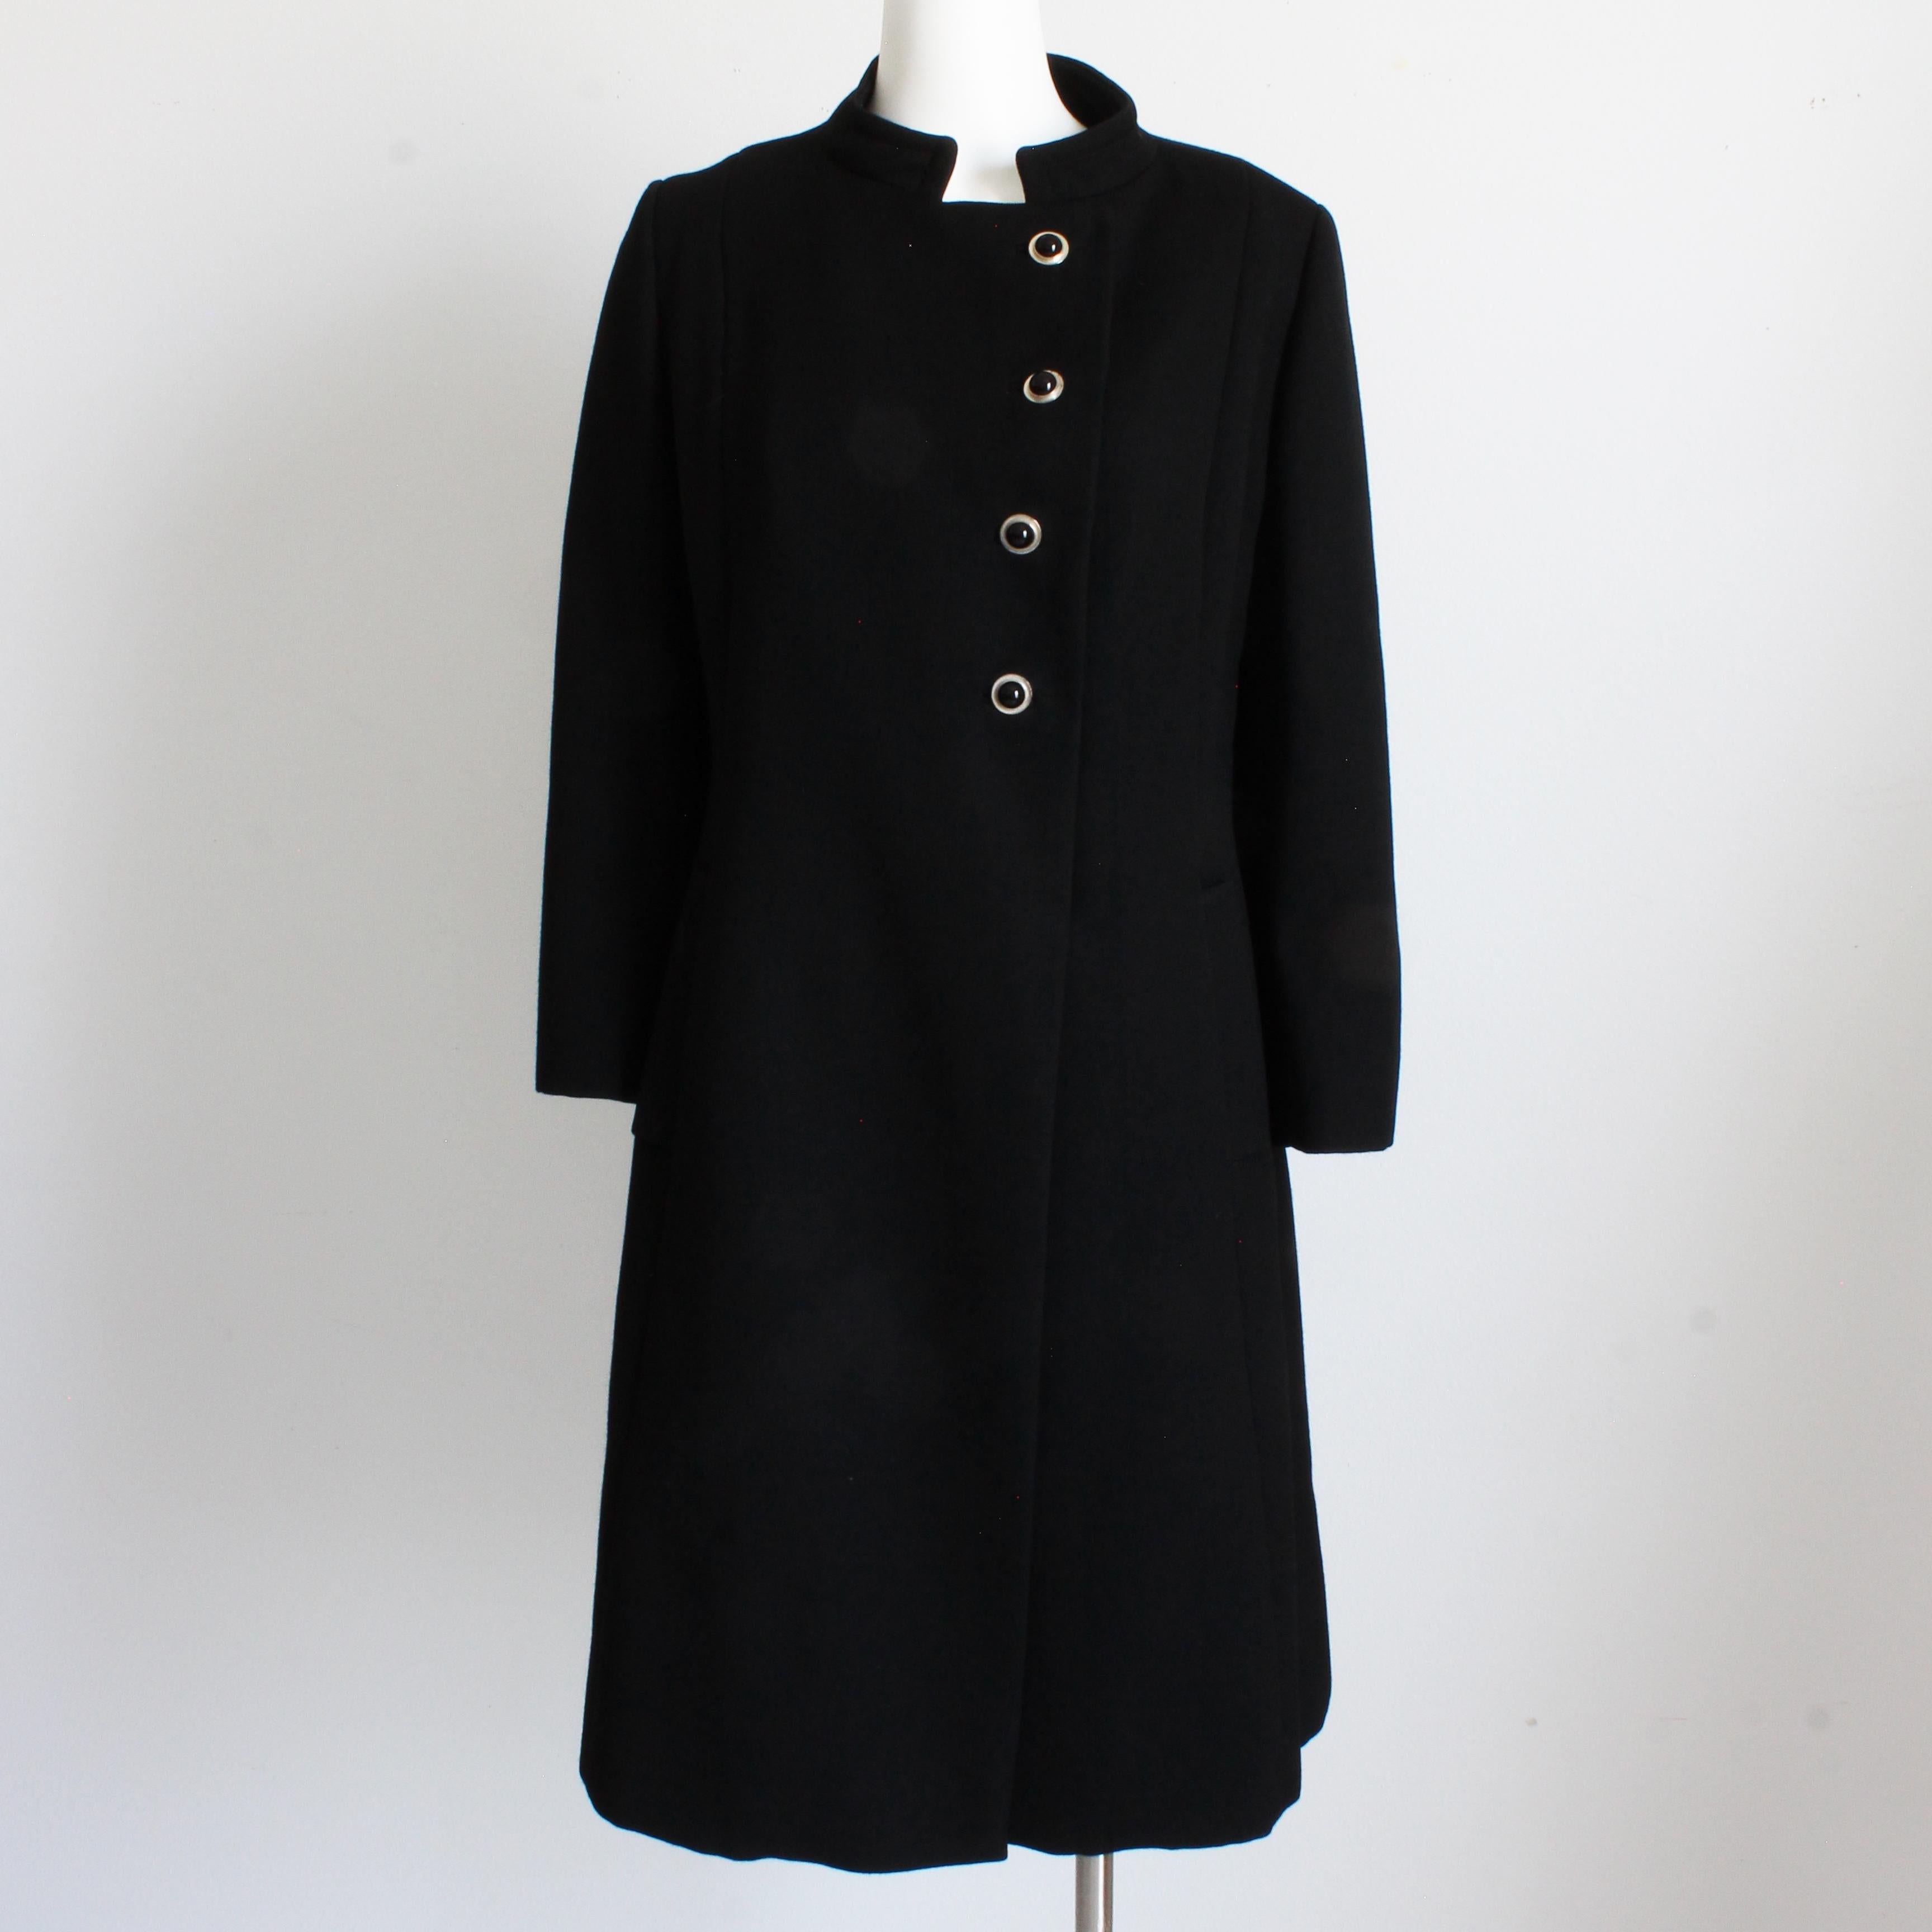 Women's 50s Wool Coat by Zelinka Matlick Military Style Tailored Sculptural Collar Rare For Sale